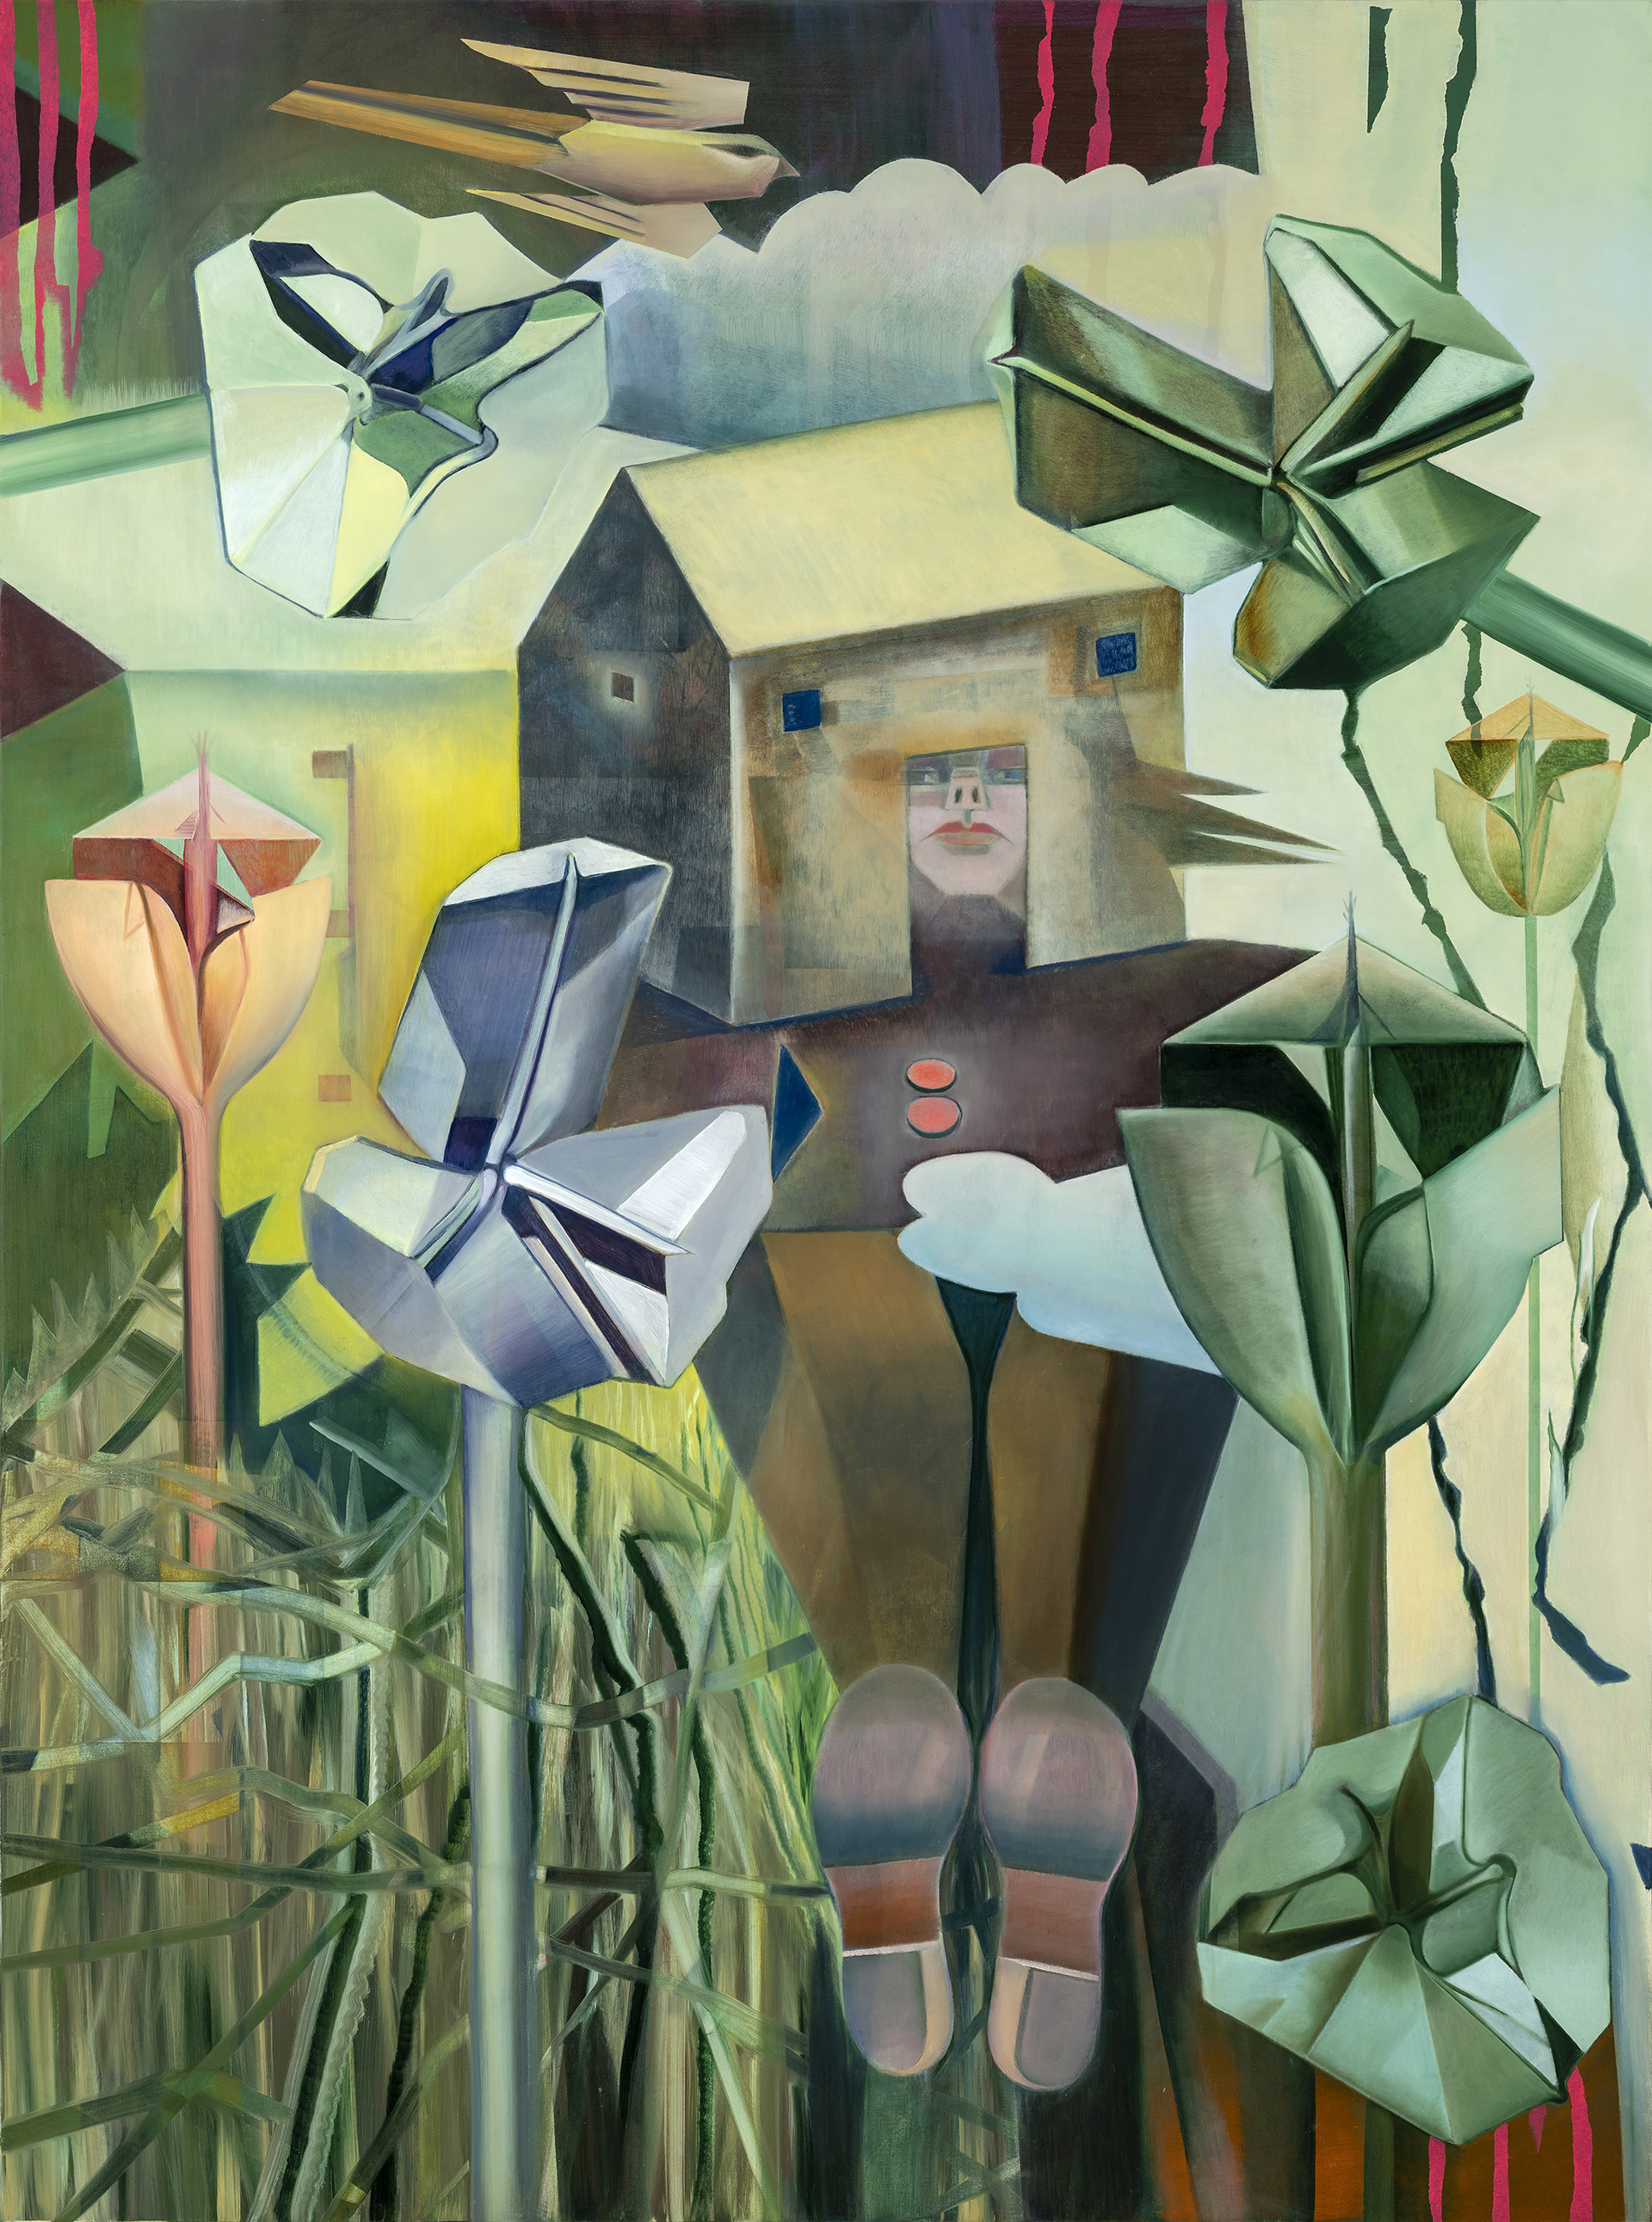 4. Nature natus is a painting by madeleine Kelly shown at Ipswich Art Gallery Milani Gallery